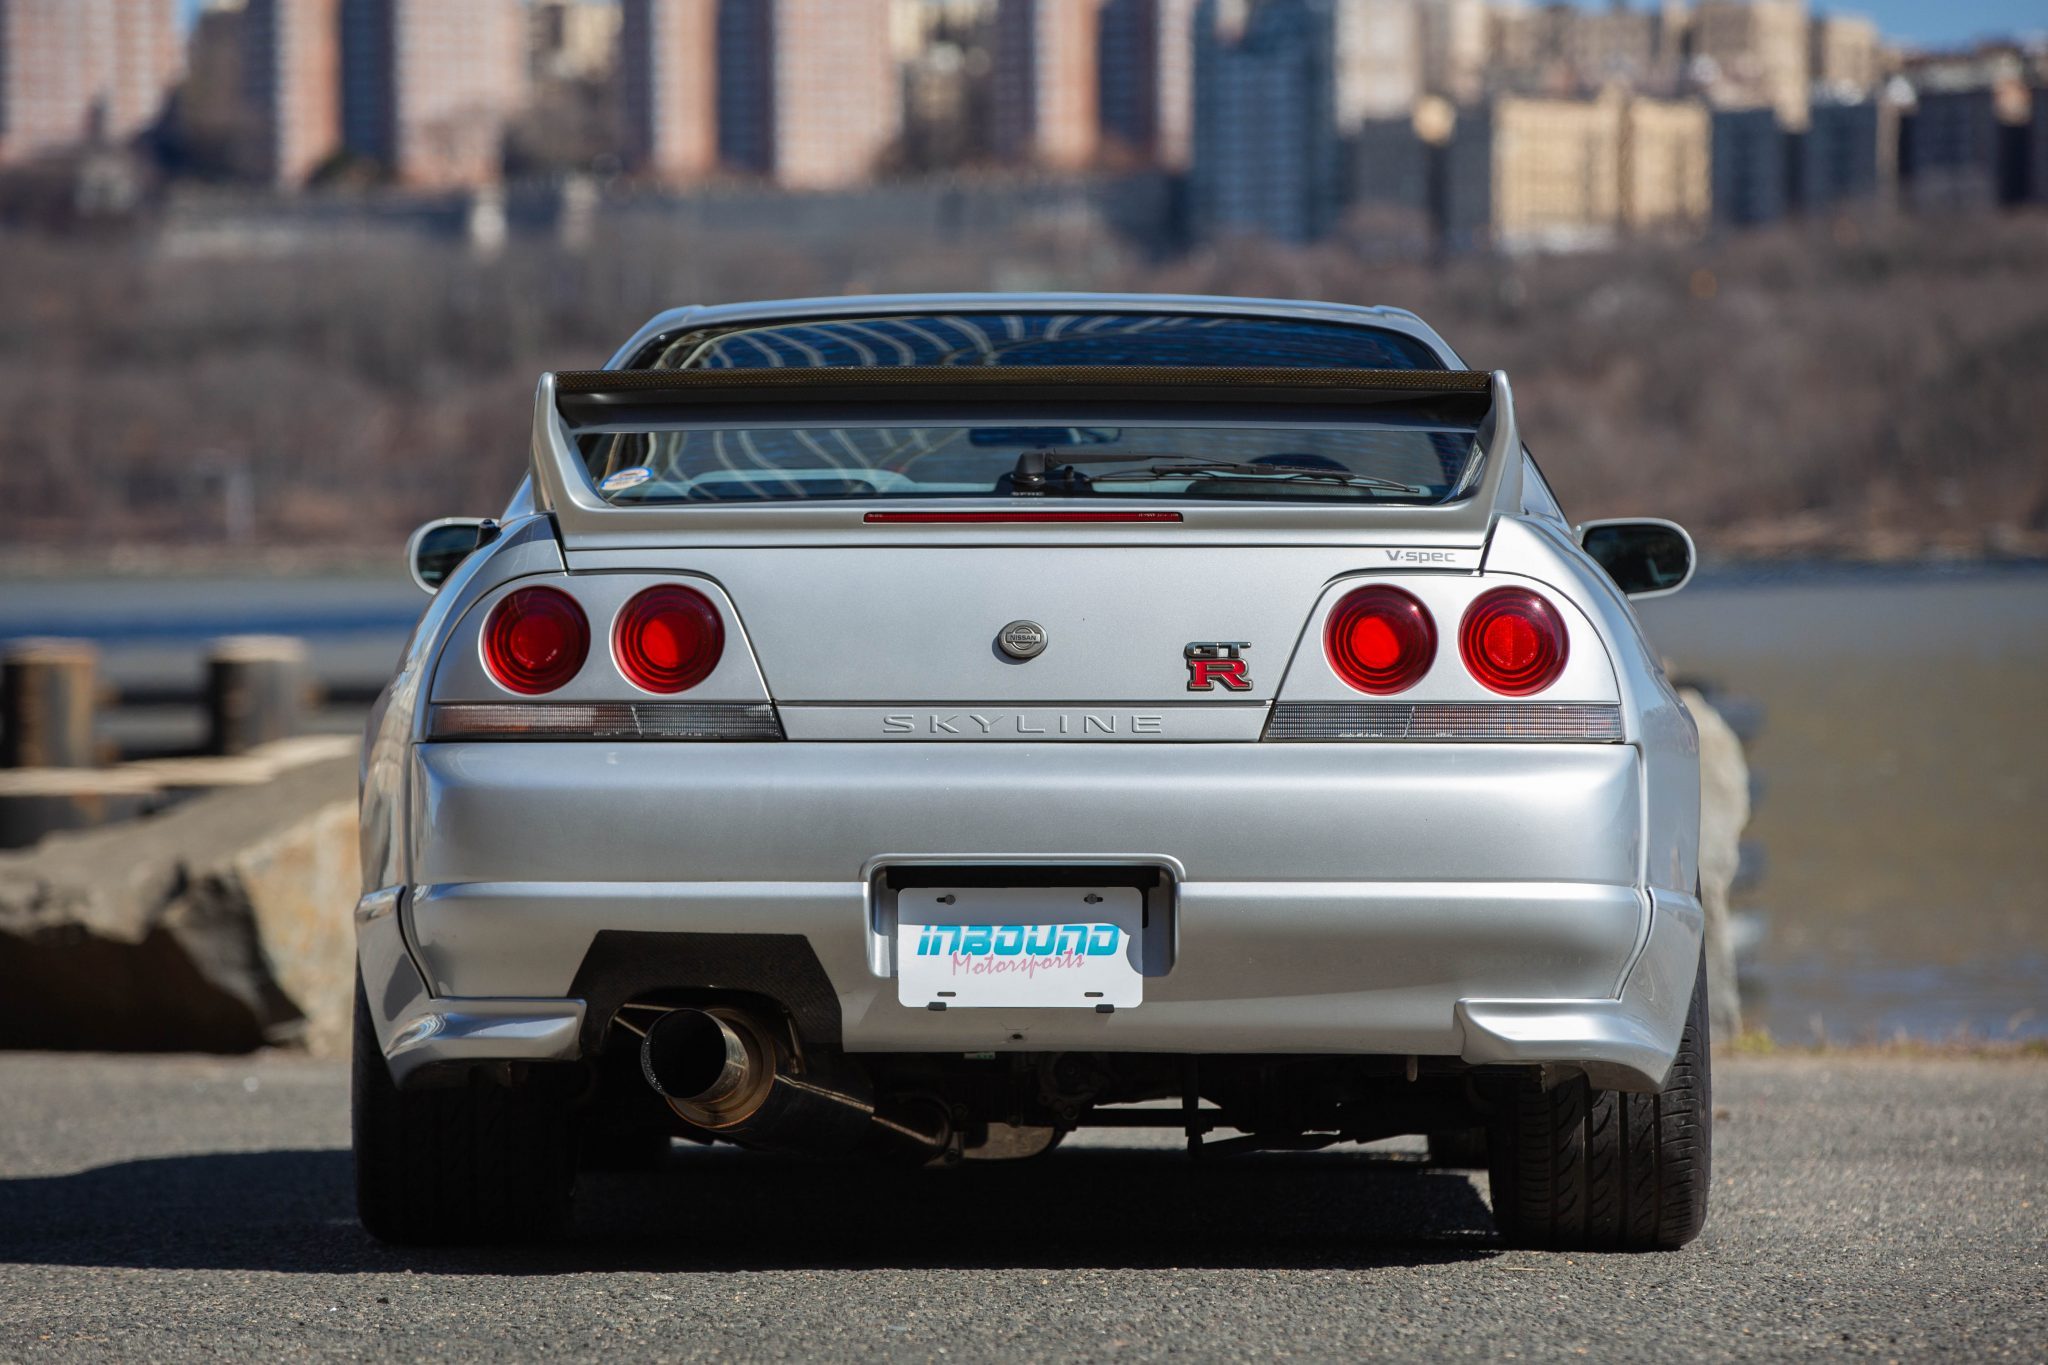 This 1995 Nissan Skyline R33 GT-R V-Spec Is A Rare JDM Classic